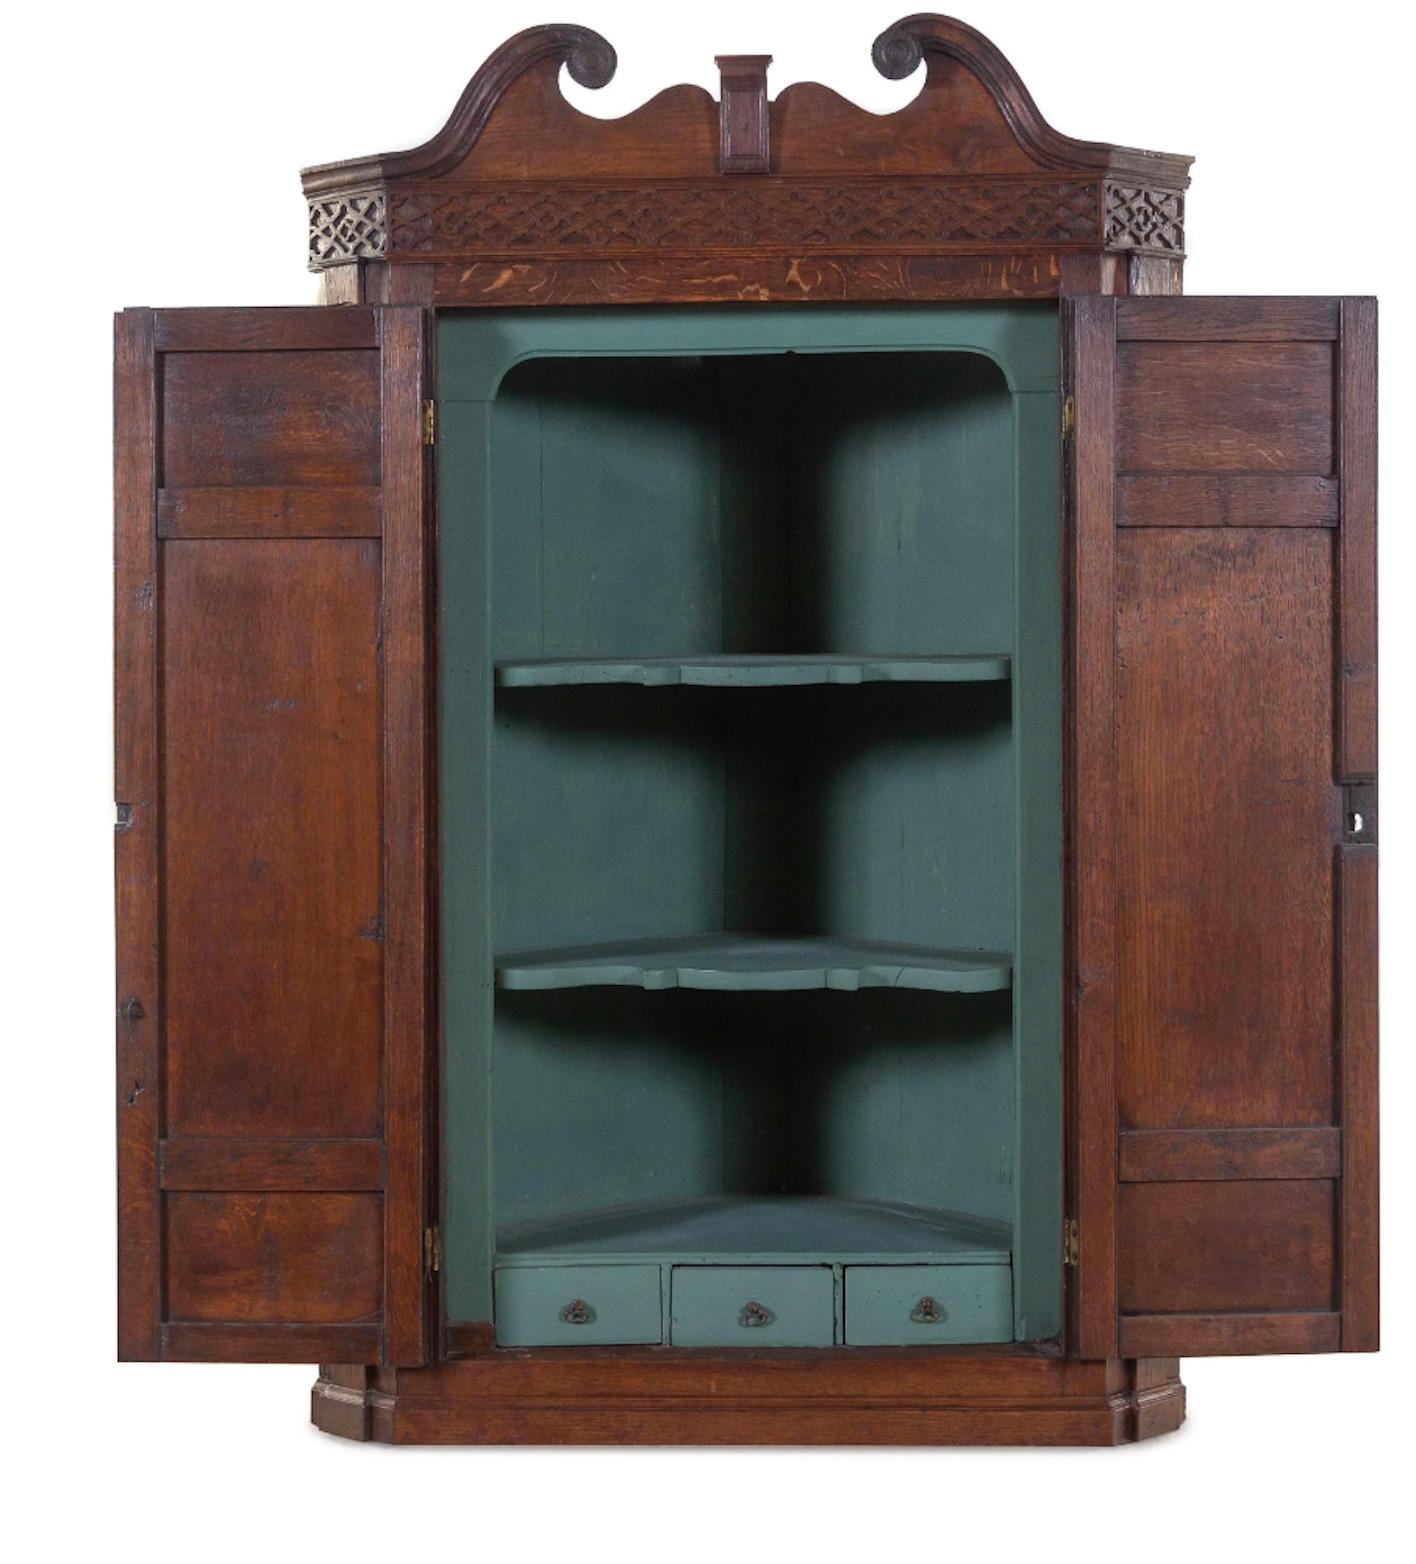 English George III Oak Hanging Corner Cabinet, Great Scale, Color and Proportions For Sale